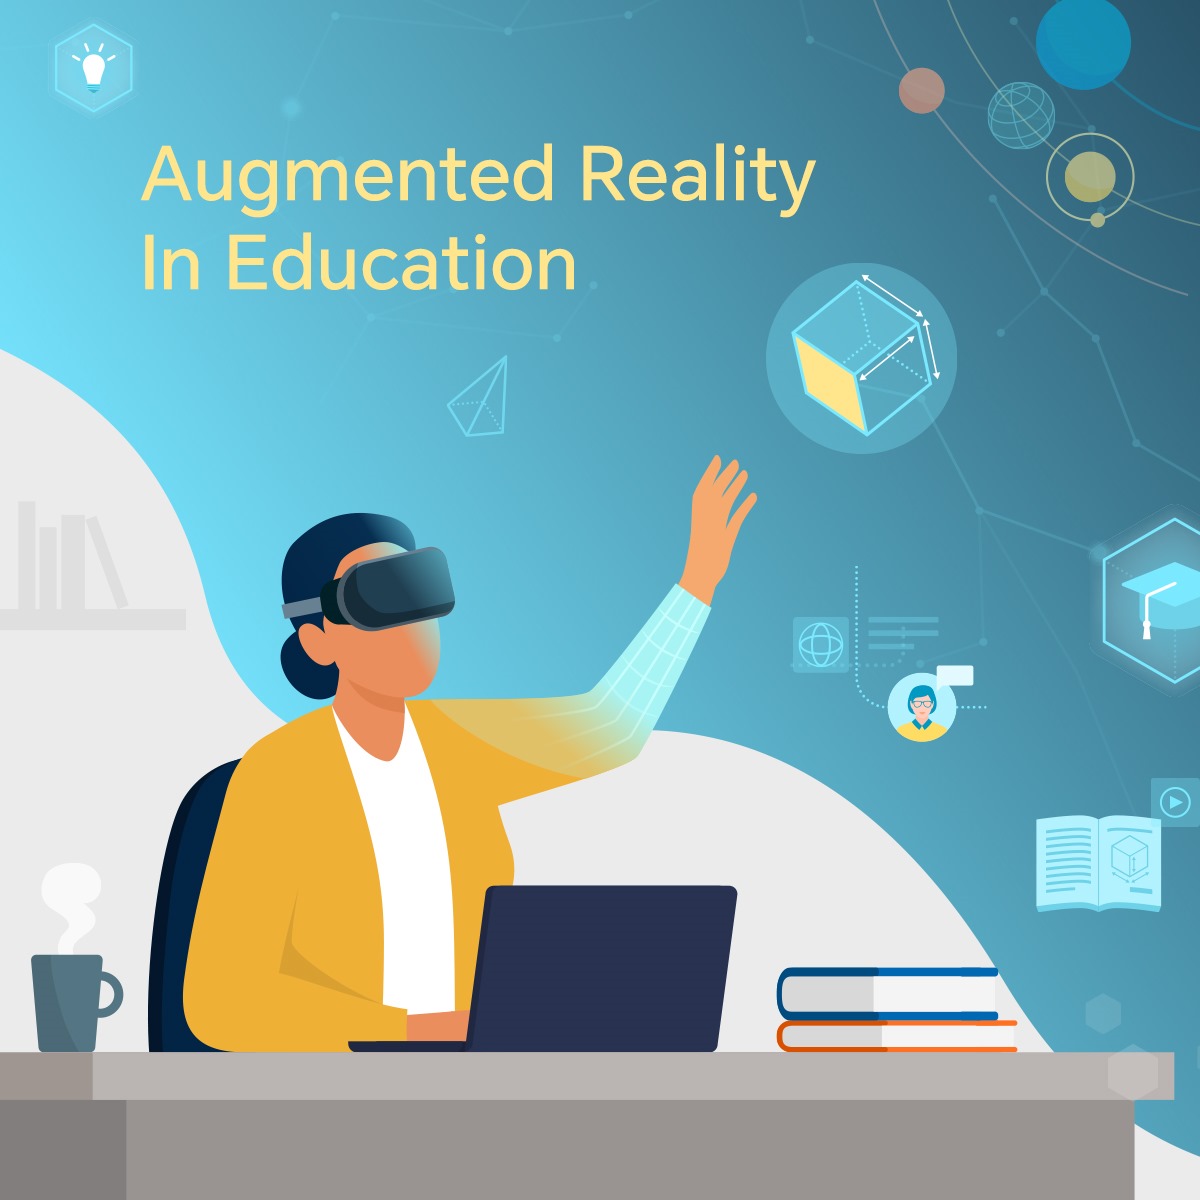 Know about the AR's educational potential in my latest blog! Immersive learning needs careful implementation. AR complements traditional methods, enhancing education. Read here: bit.ly/4bz0VQk #AR #AugmentedReality